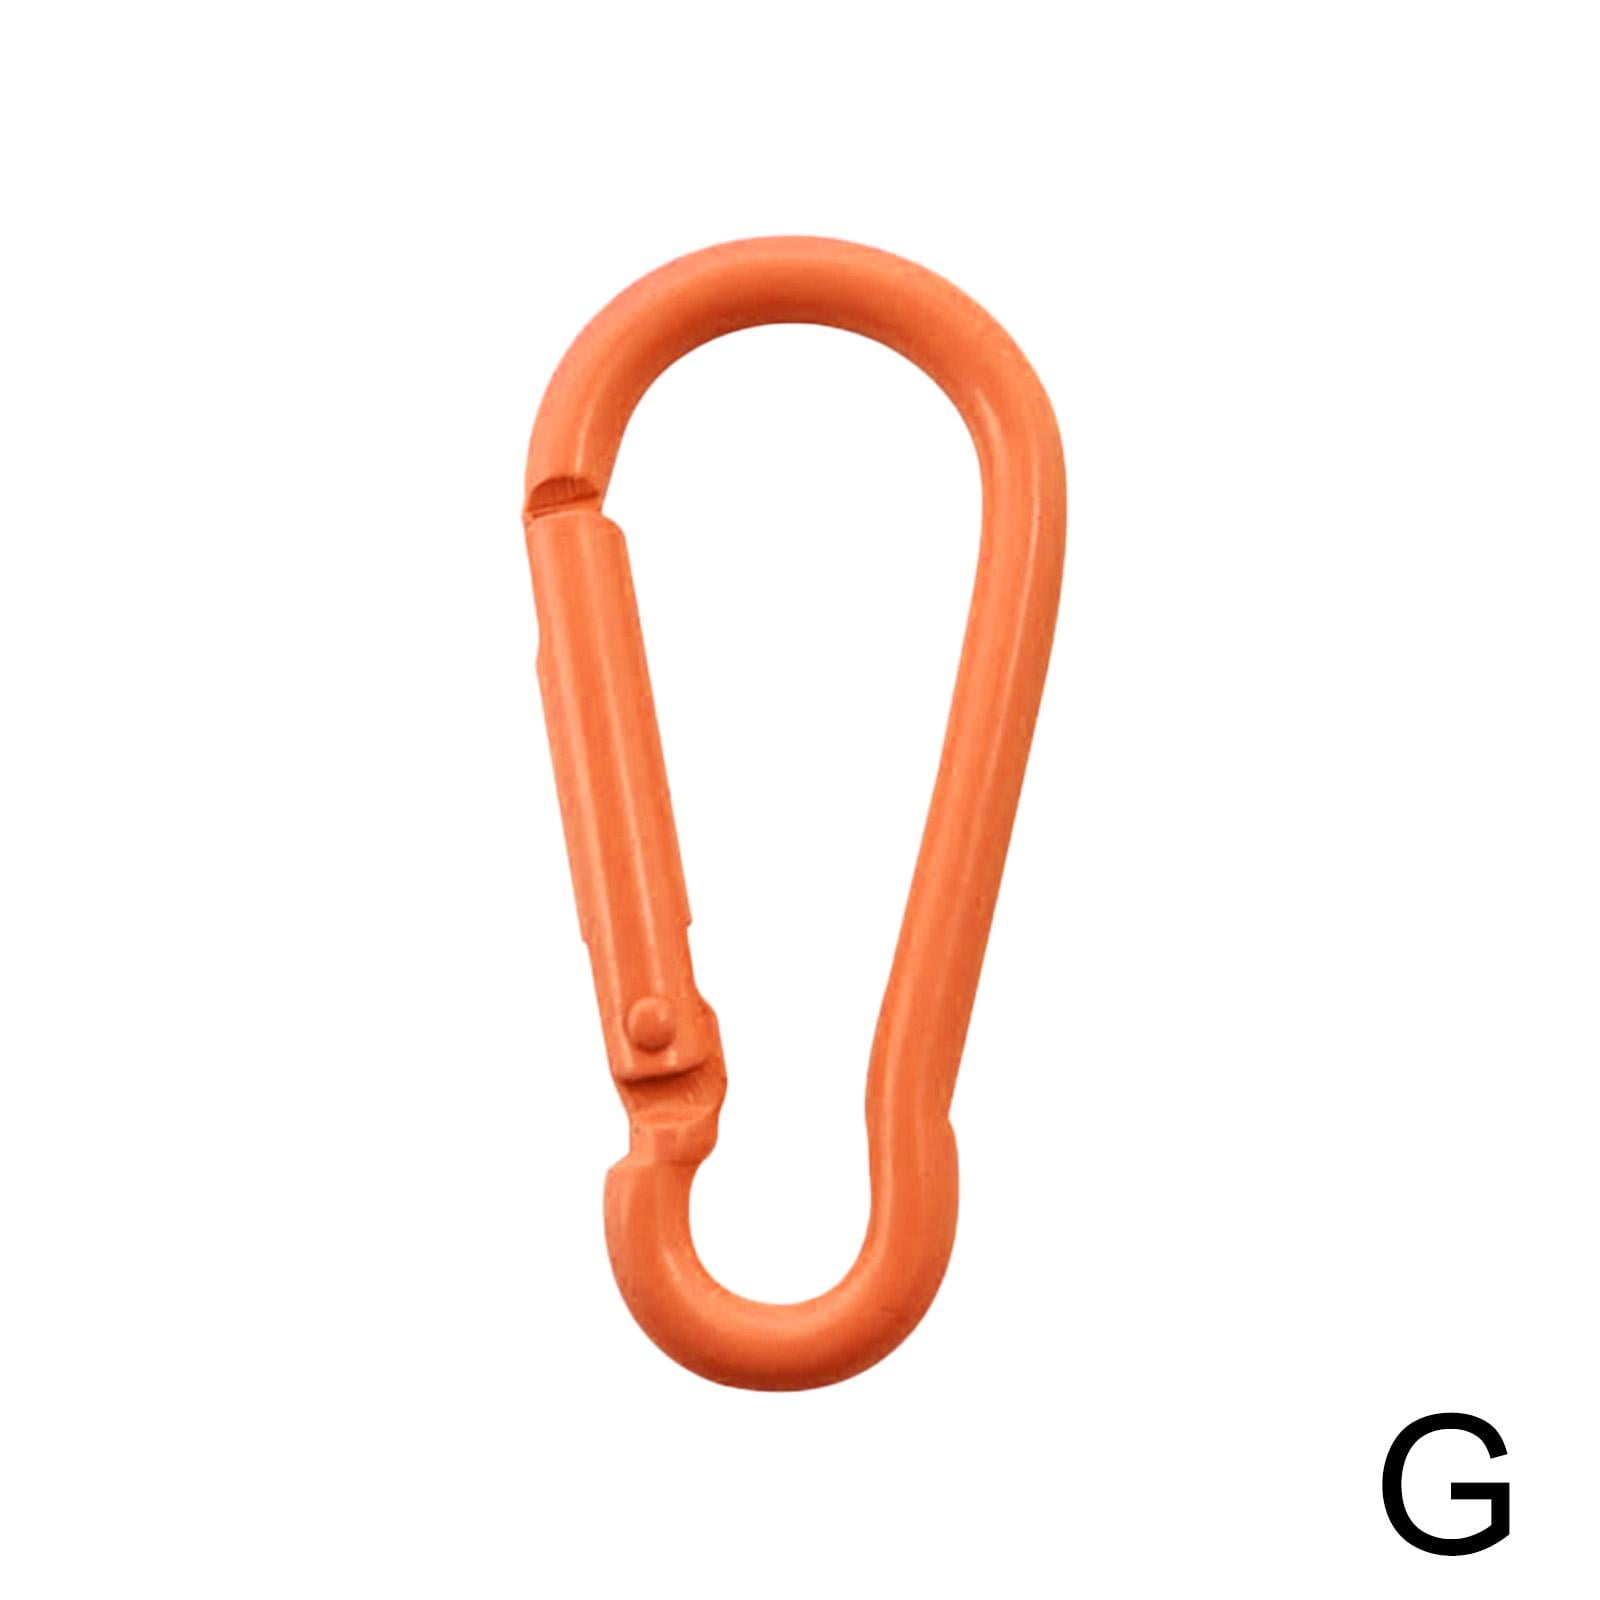 S Carabiner Small Alloy Snap Hook 20Pcs Mini Spring Clips 1.6 Inch Keychain  Clip Tiny Clip Attachment Dual Gate S Binder Carabiner Wire Gate Snap